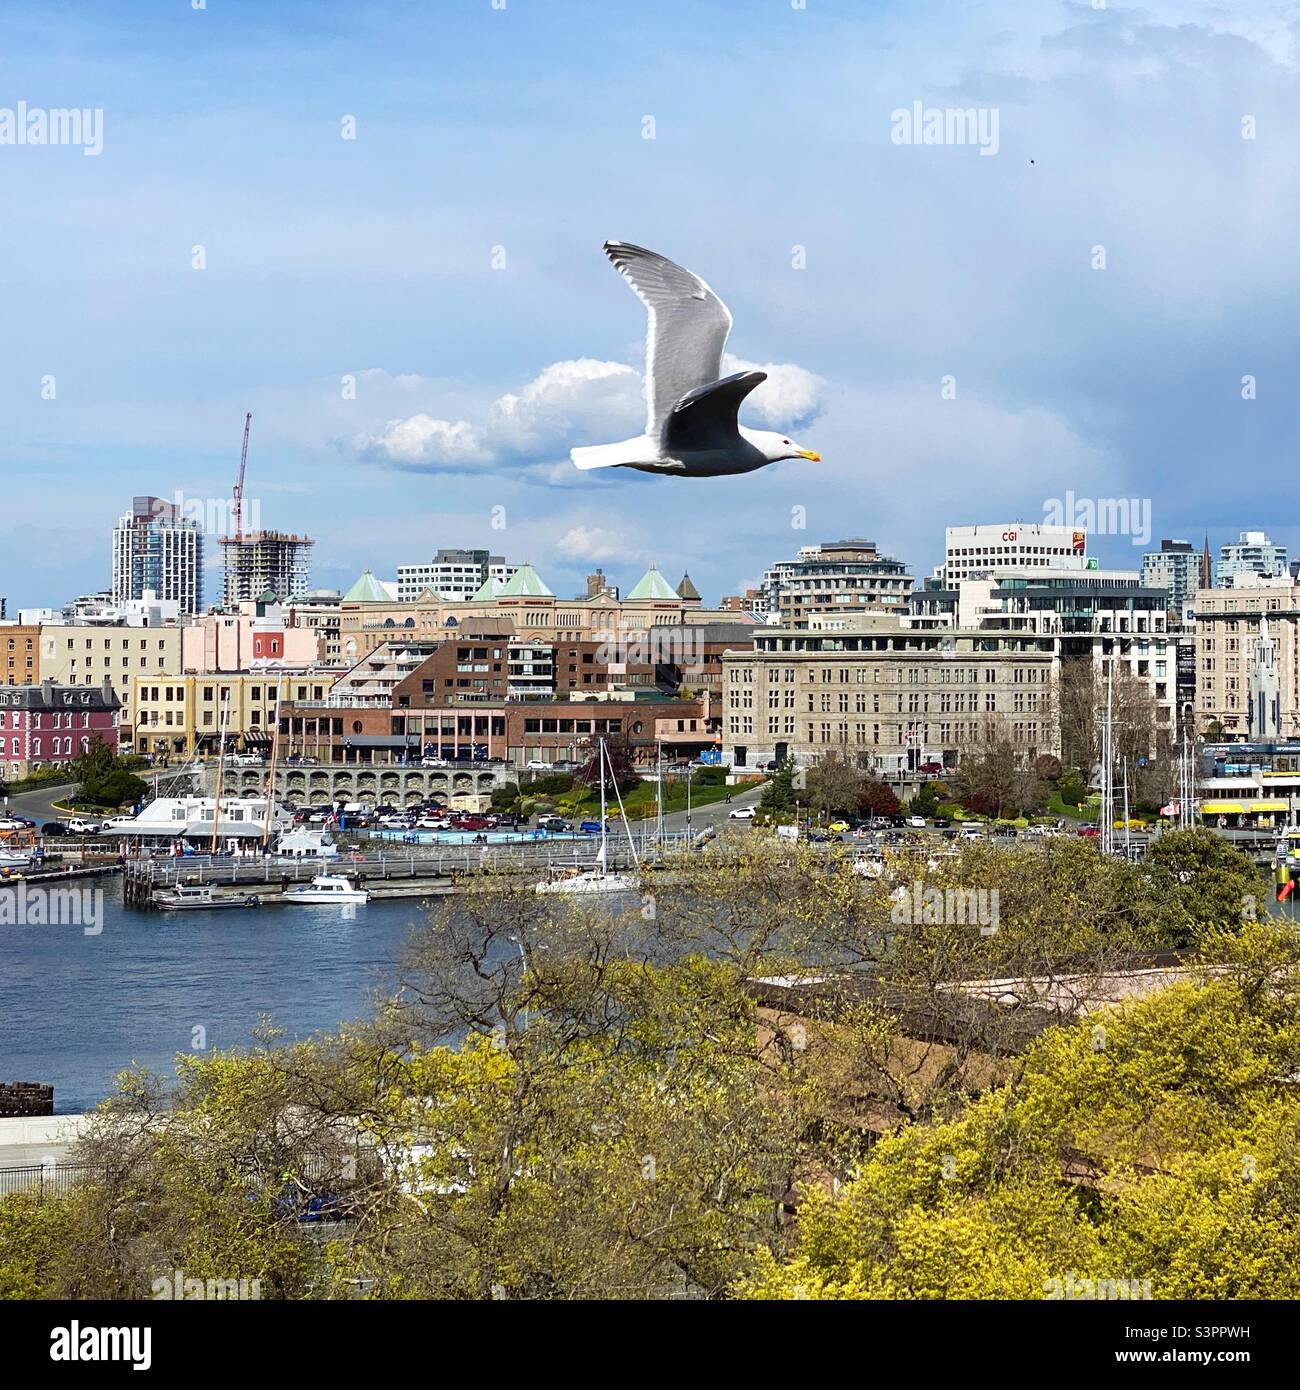 A seagull in the sky over Victoria, British Columbia in springtime. Stock Photo